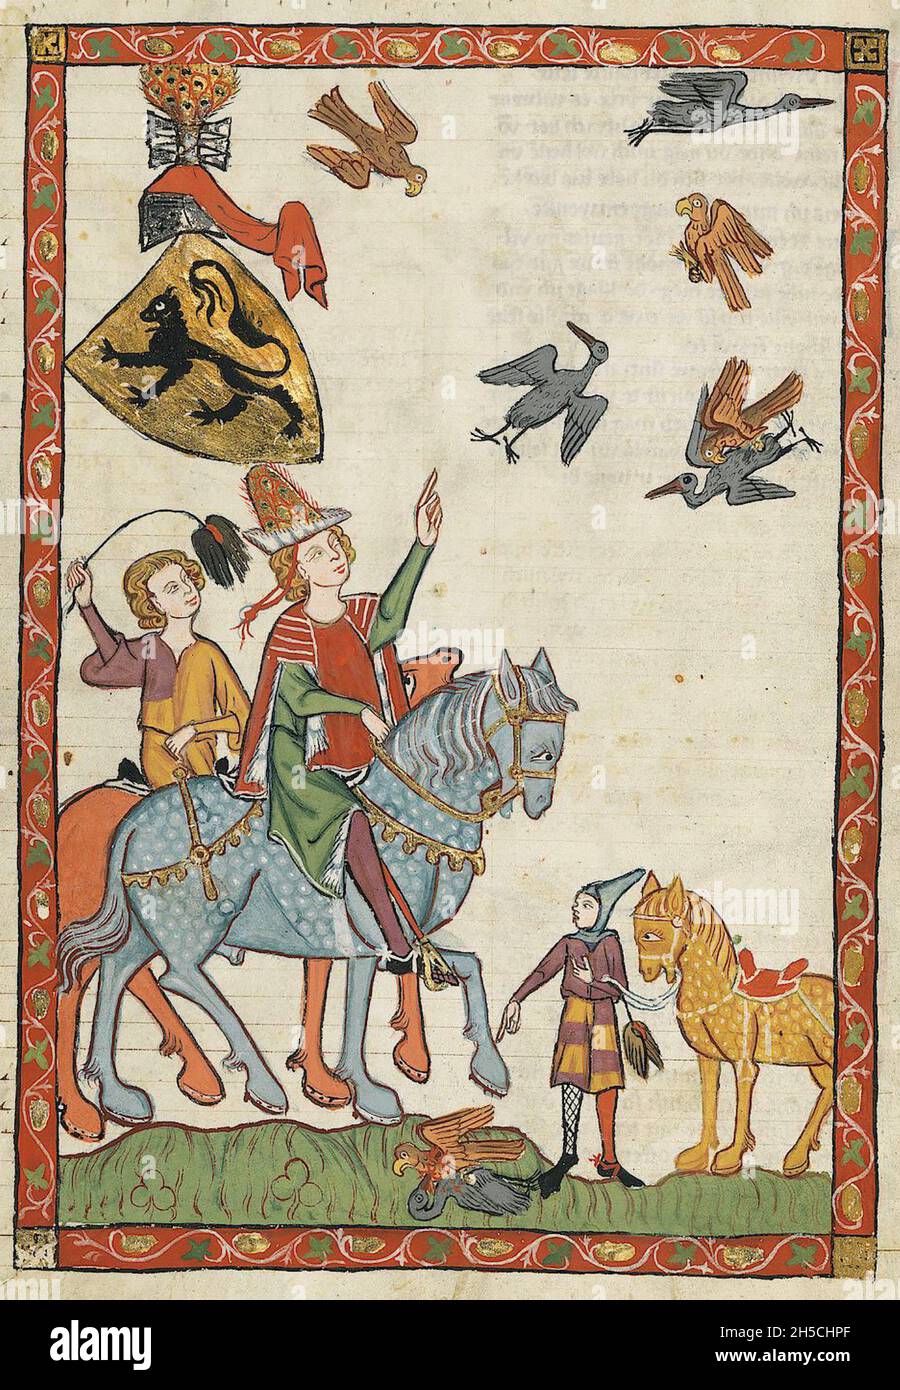 CODEX MANESSE An early to middle 14th century German manuscript containing songs and illustrating medieval life. Falconry. Stock Photo